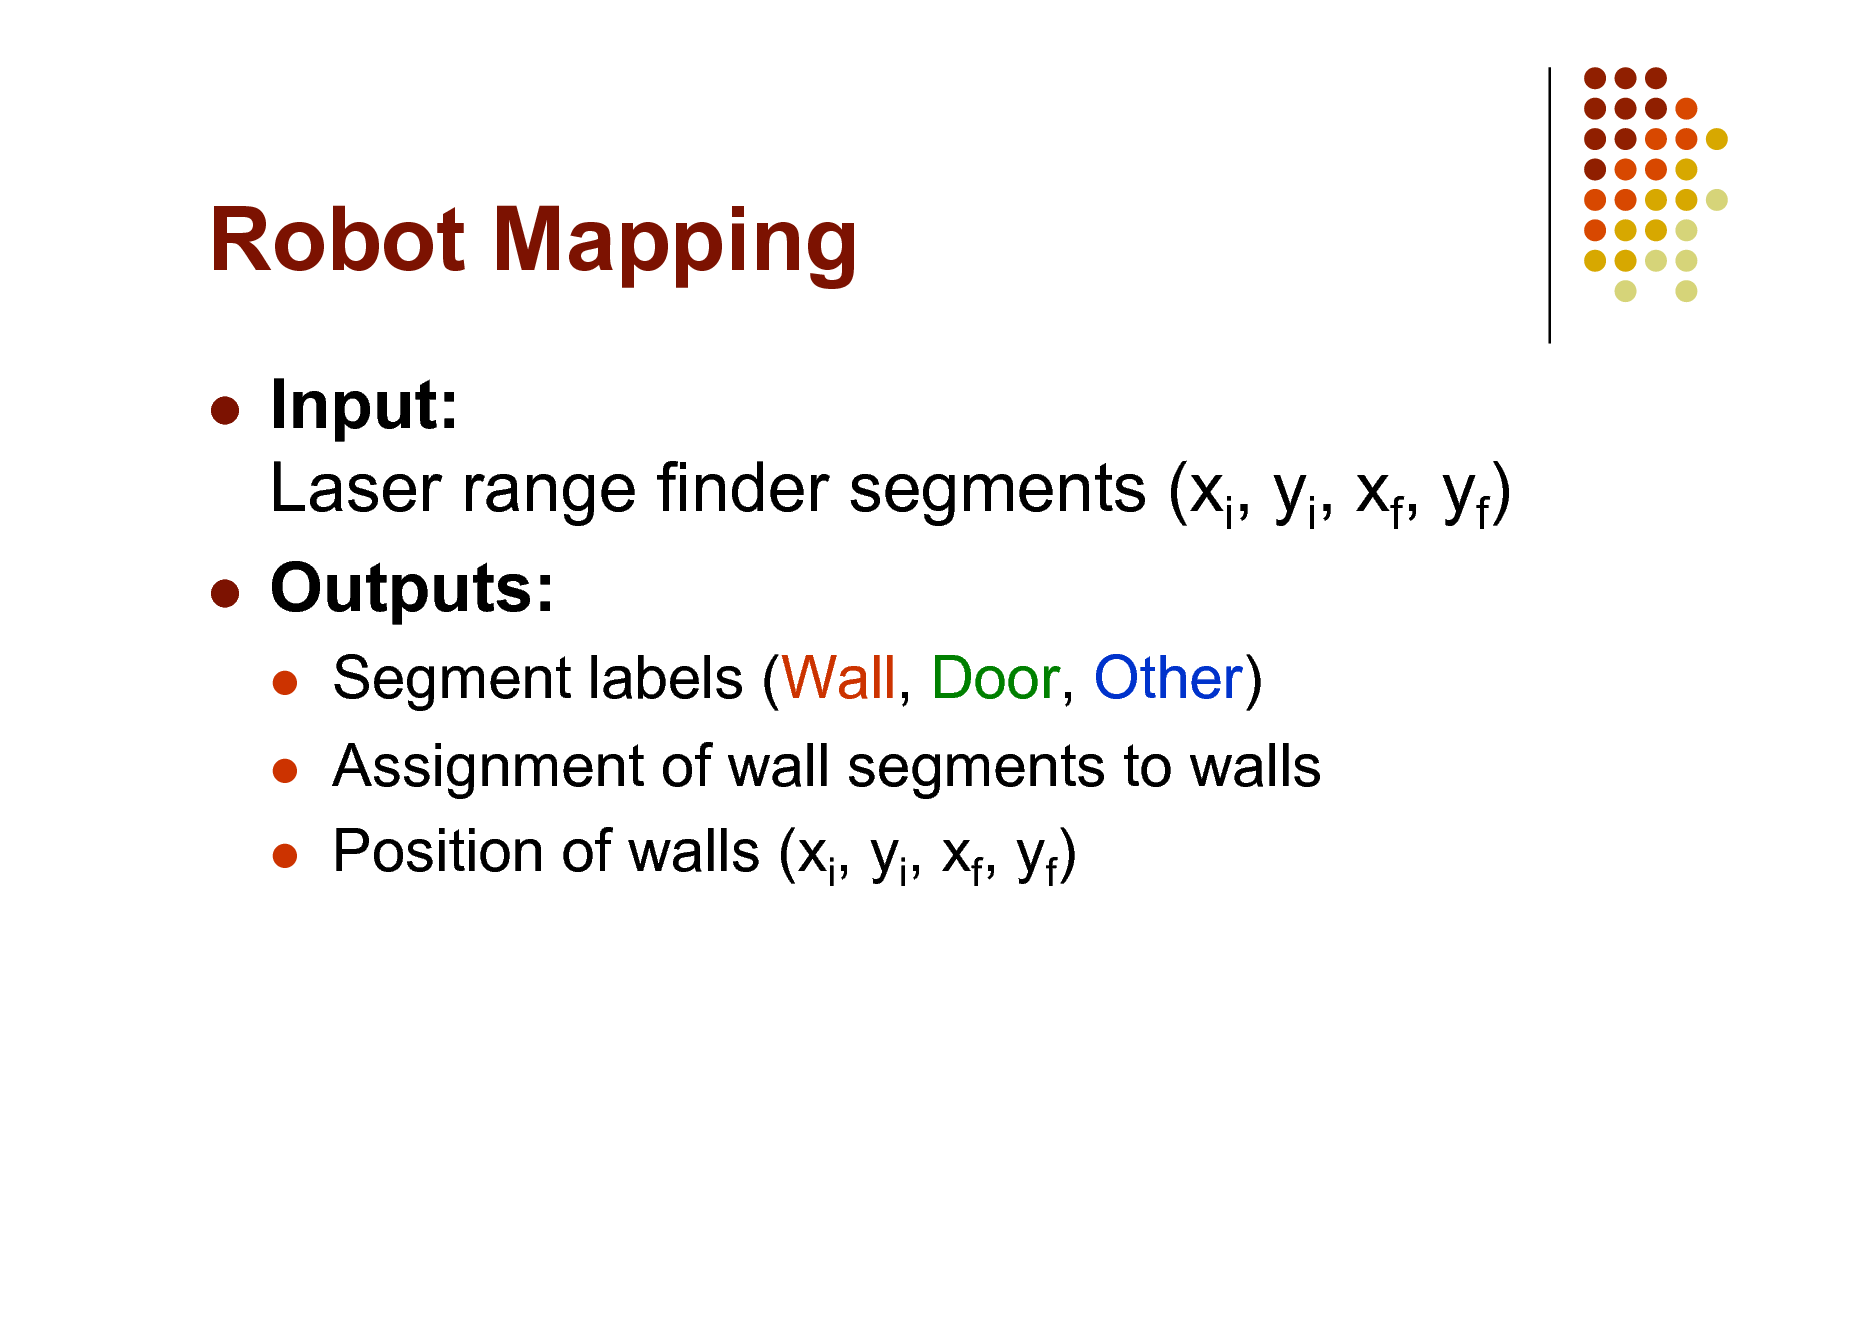 Slide: Robot Mapping
Input: Laser range finder segments (xi, yi, xf, yf)  Outputs:

  

Segment labels (Wall, Door, Other) Assignment of wall segments to walls Position of walls (xi, yi, xf, yf)

